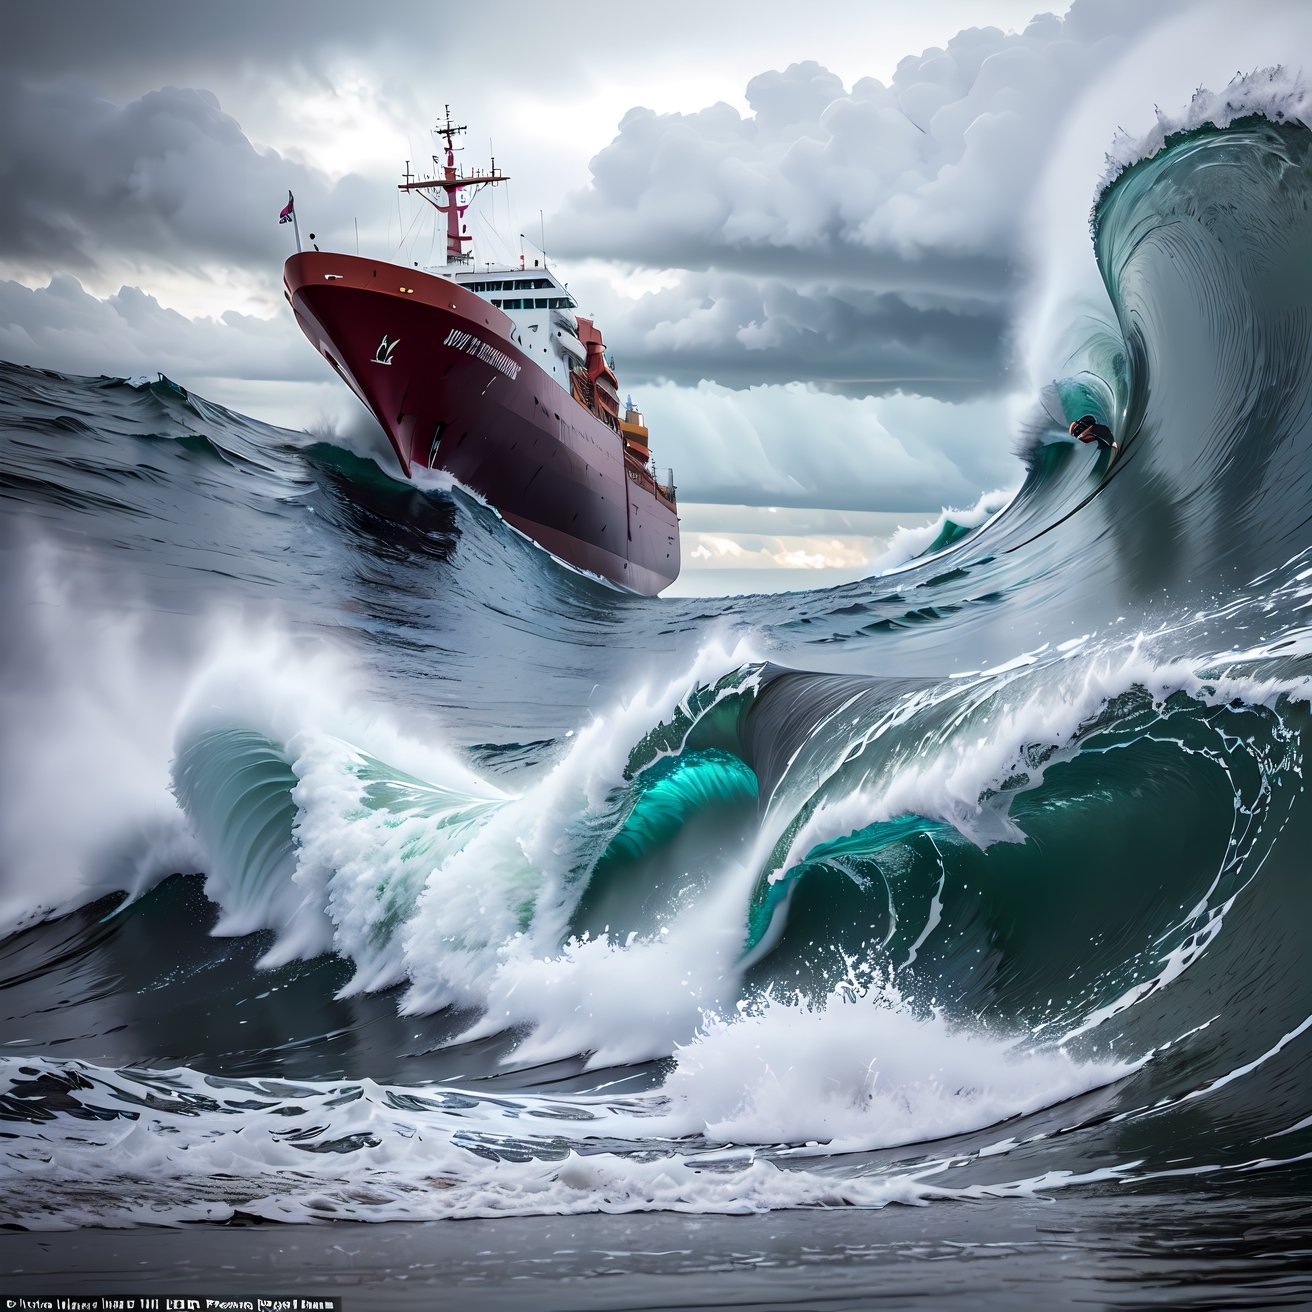 masterpiece, finely detailed, great diffusion, great composition, astounding detail, UHD, cargo ship soaring through rough ocean storm, huge waves towering, thunderstorm, lots of rain, snow, 